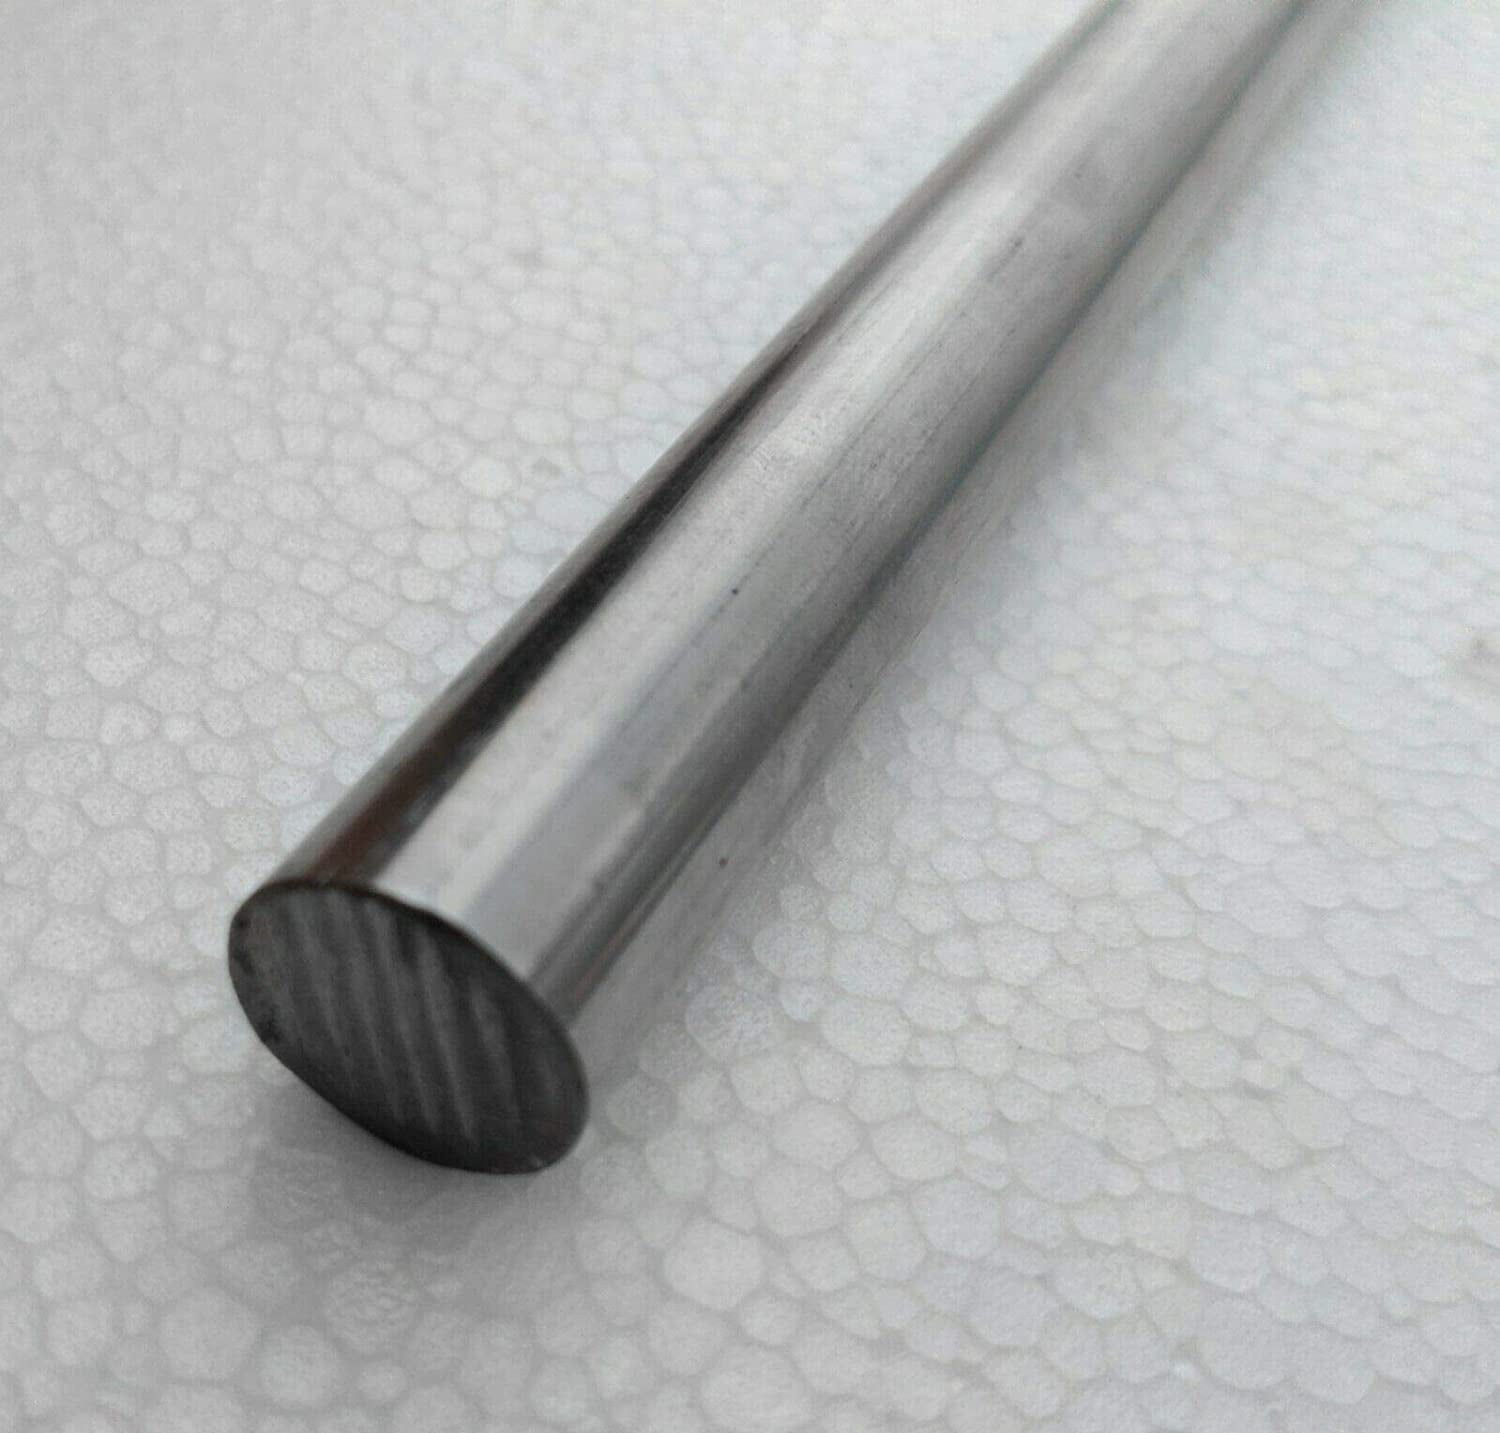 x 24 Stainless Steel Rod 1/4 1 Pc of .25 304/304L Round 